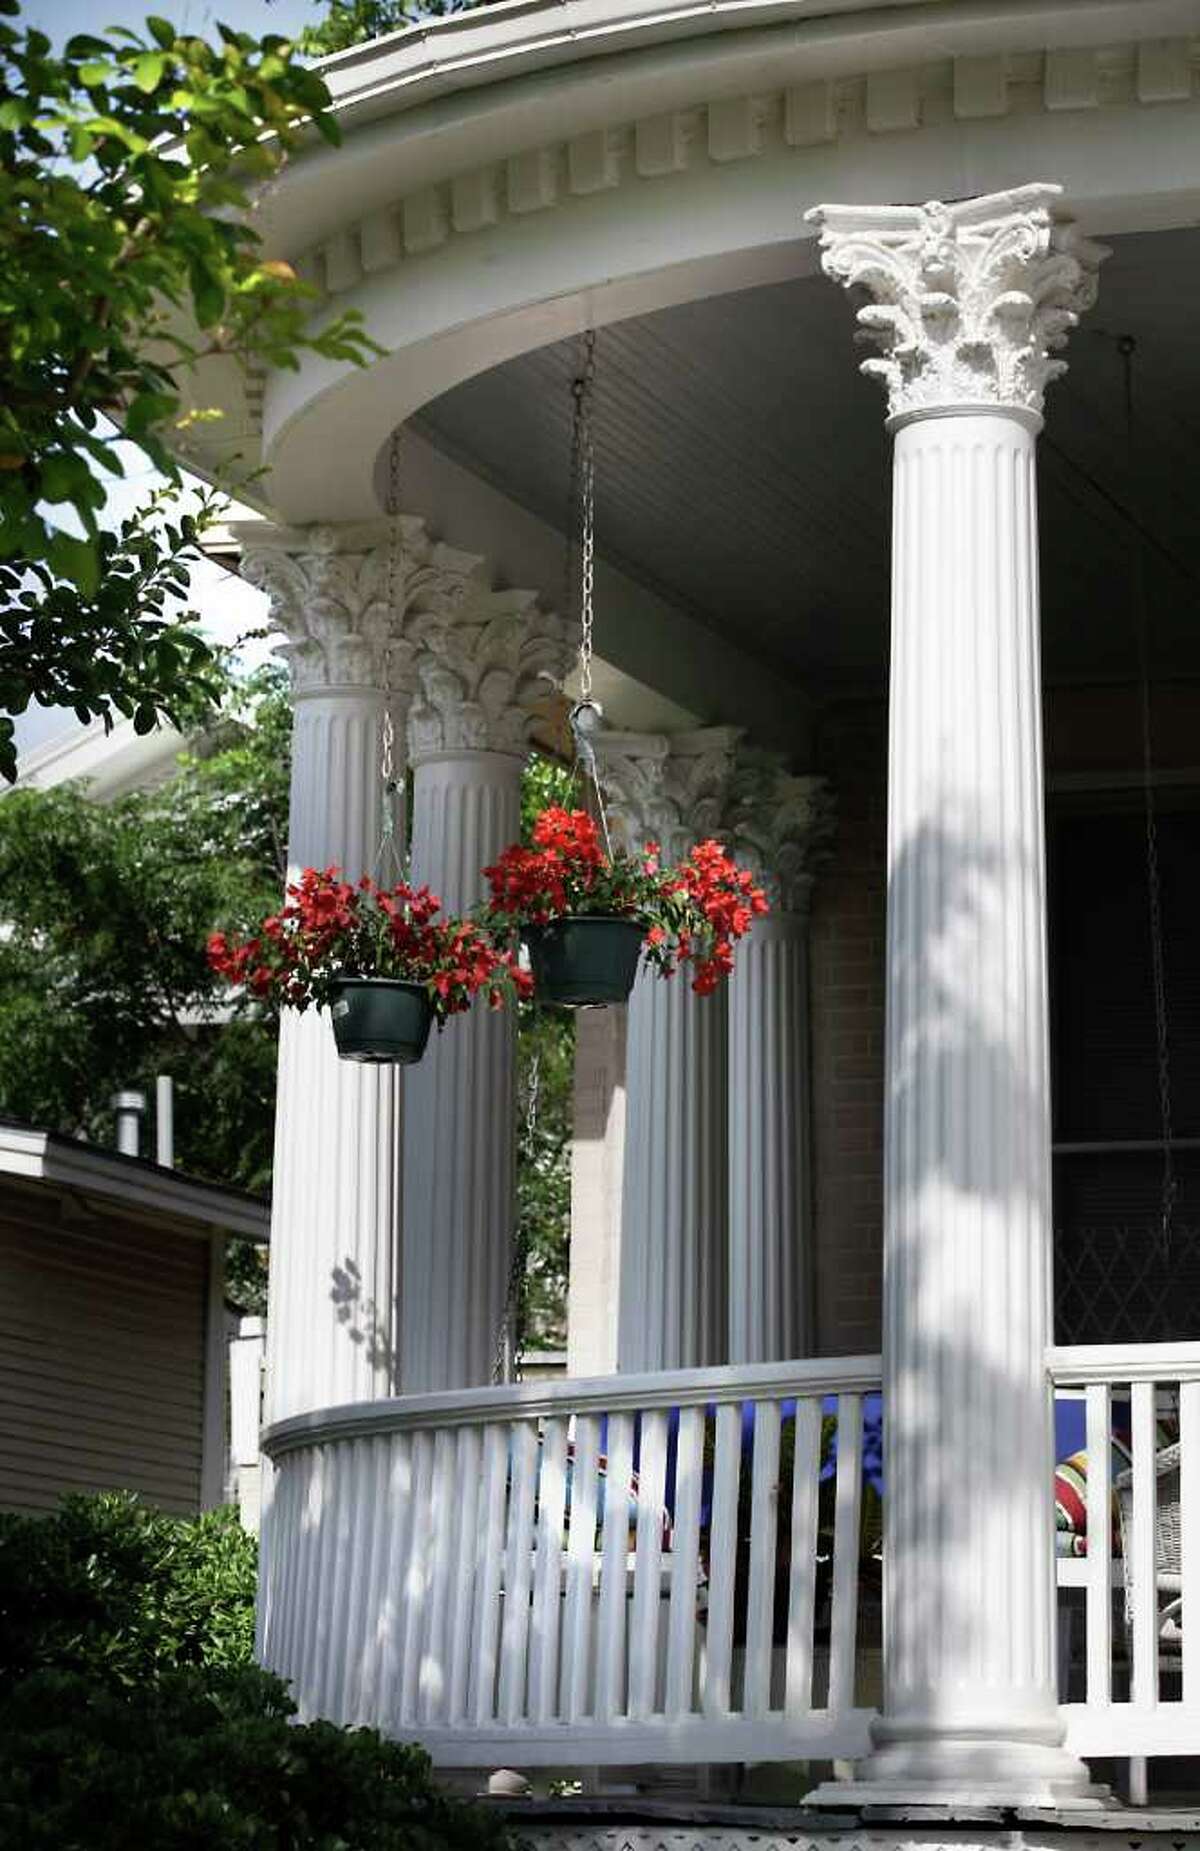 Real Estate - Large ornate columns adorn the circular porch at 805 N. Pine, home of BL Ross, in Dignowity Hill. Monday, May,16, 2011. photo Bob Owen/rowen@express-news.net